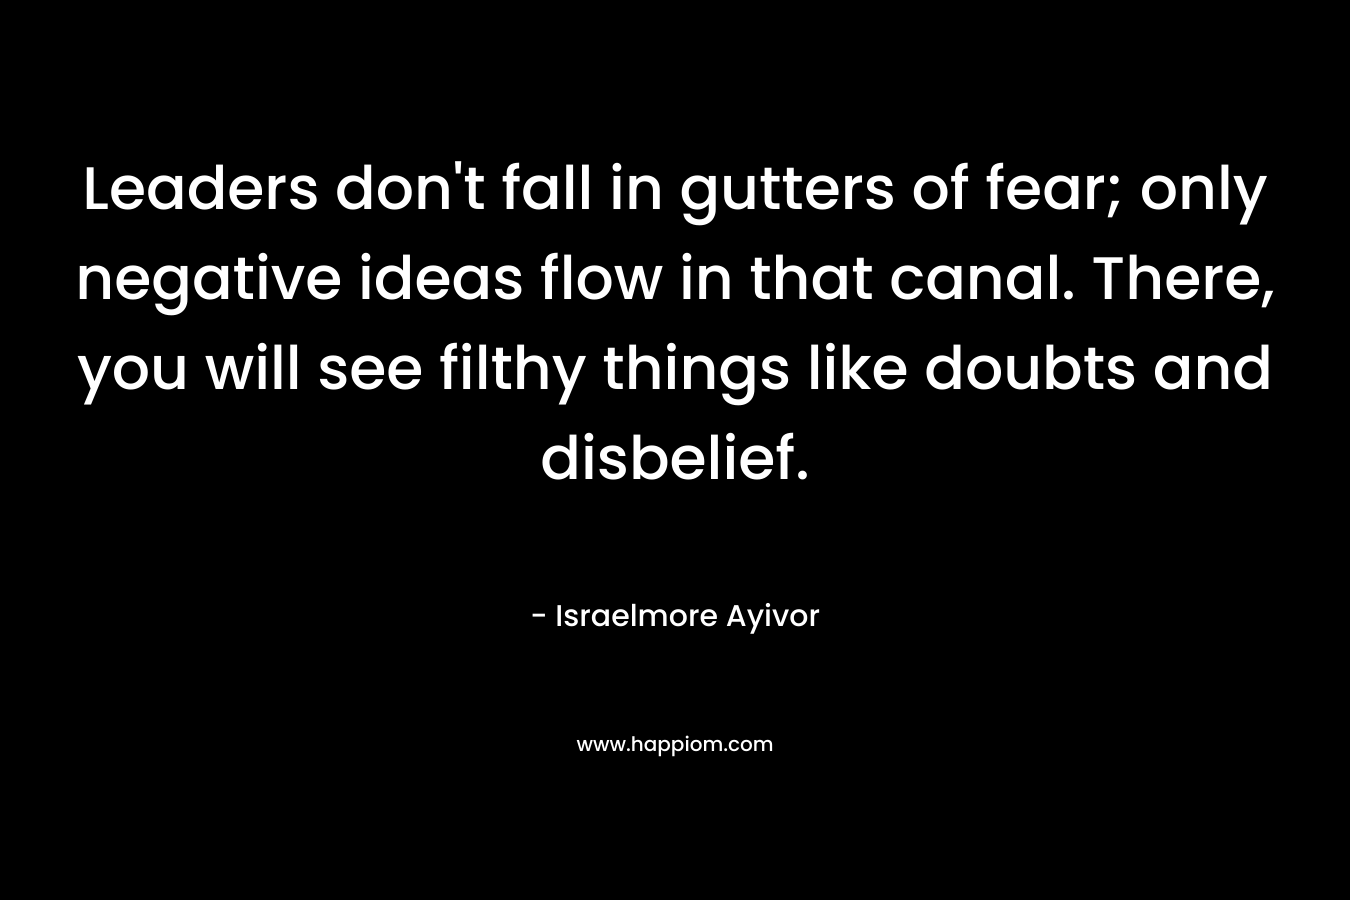 Leaders don't fall in gutters of fear; only negative ideas flow in that canal. There, you will see filthy things like doubts and disbelief.